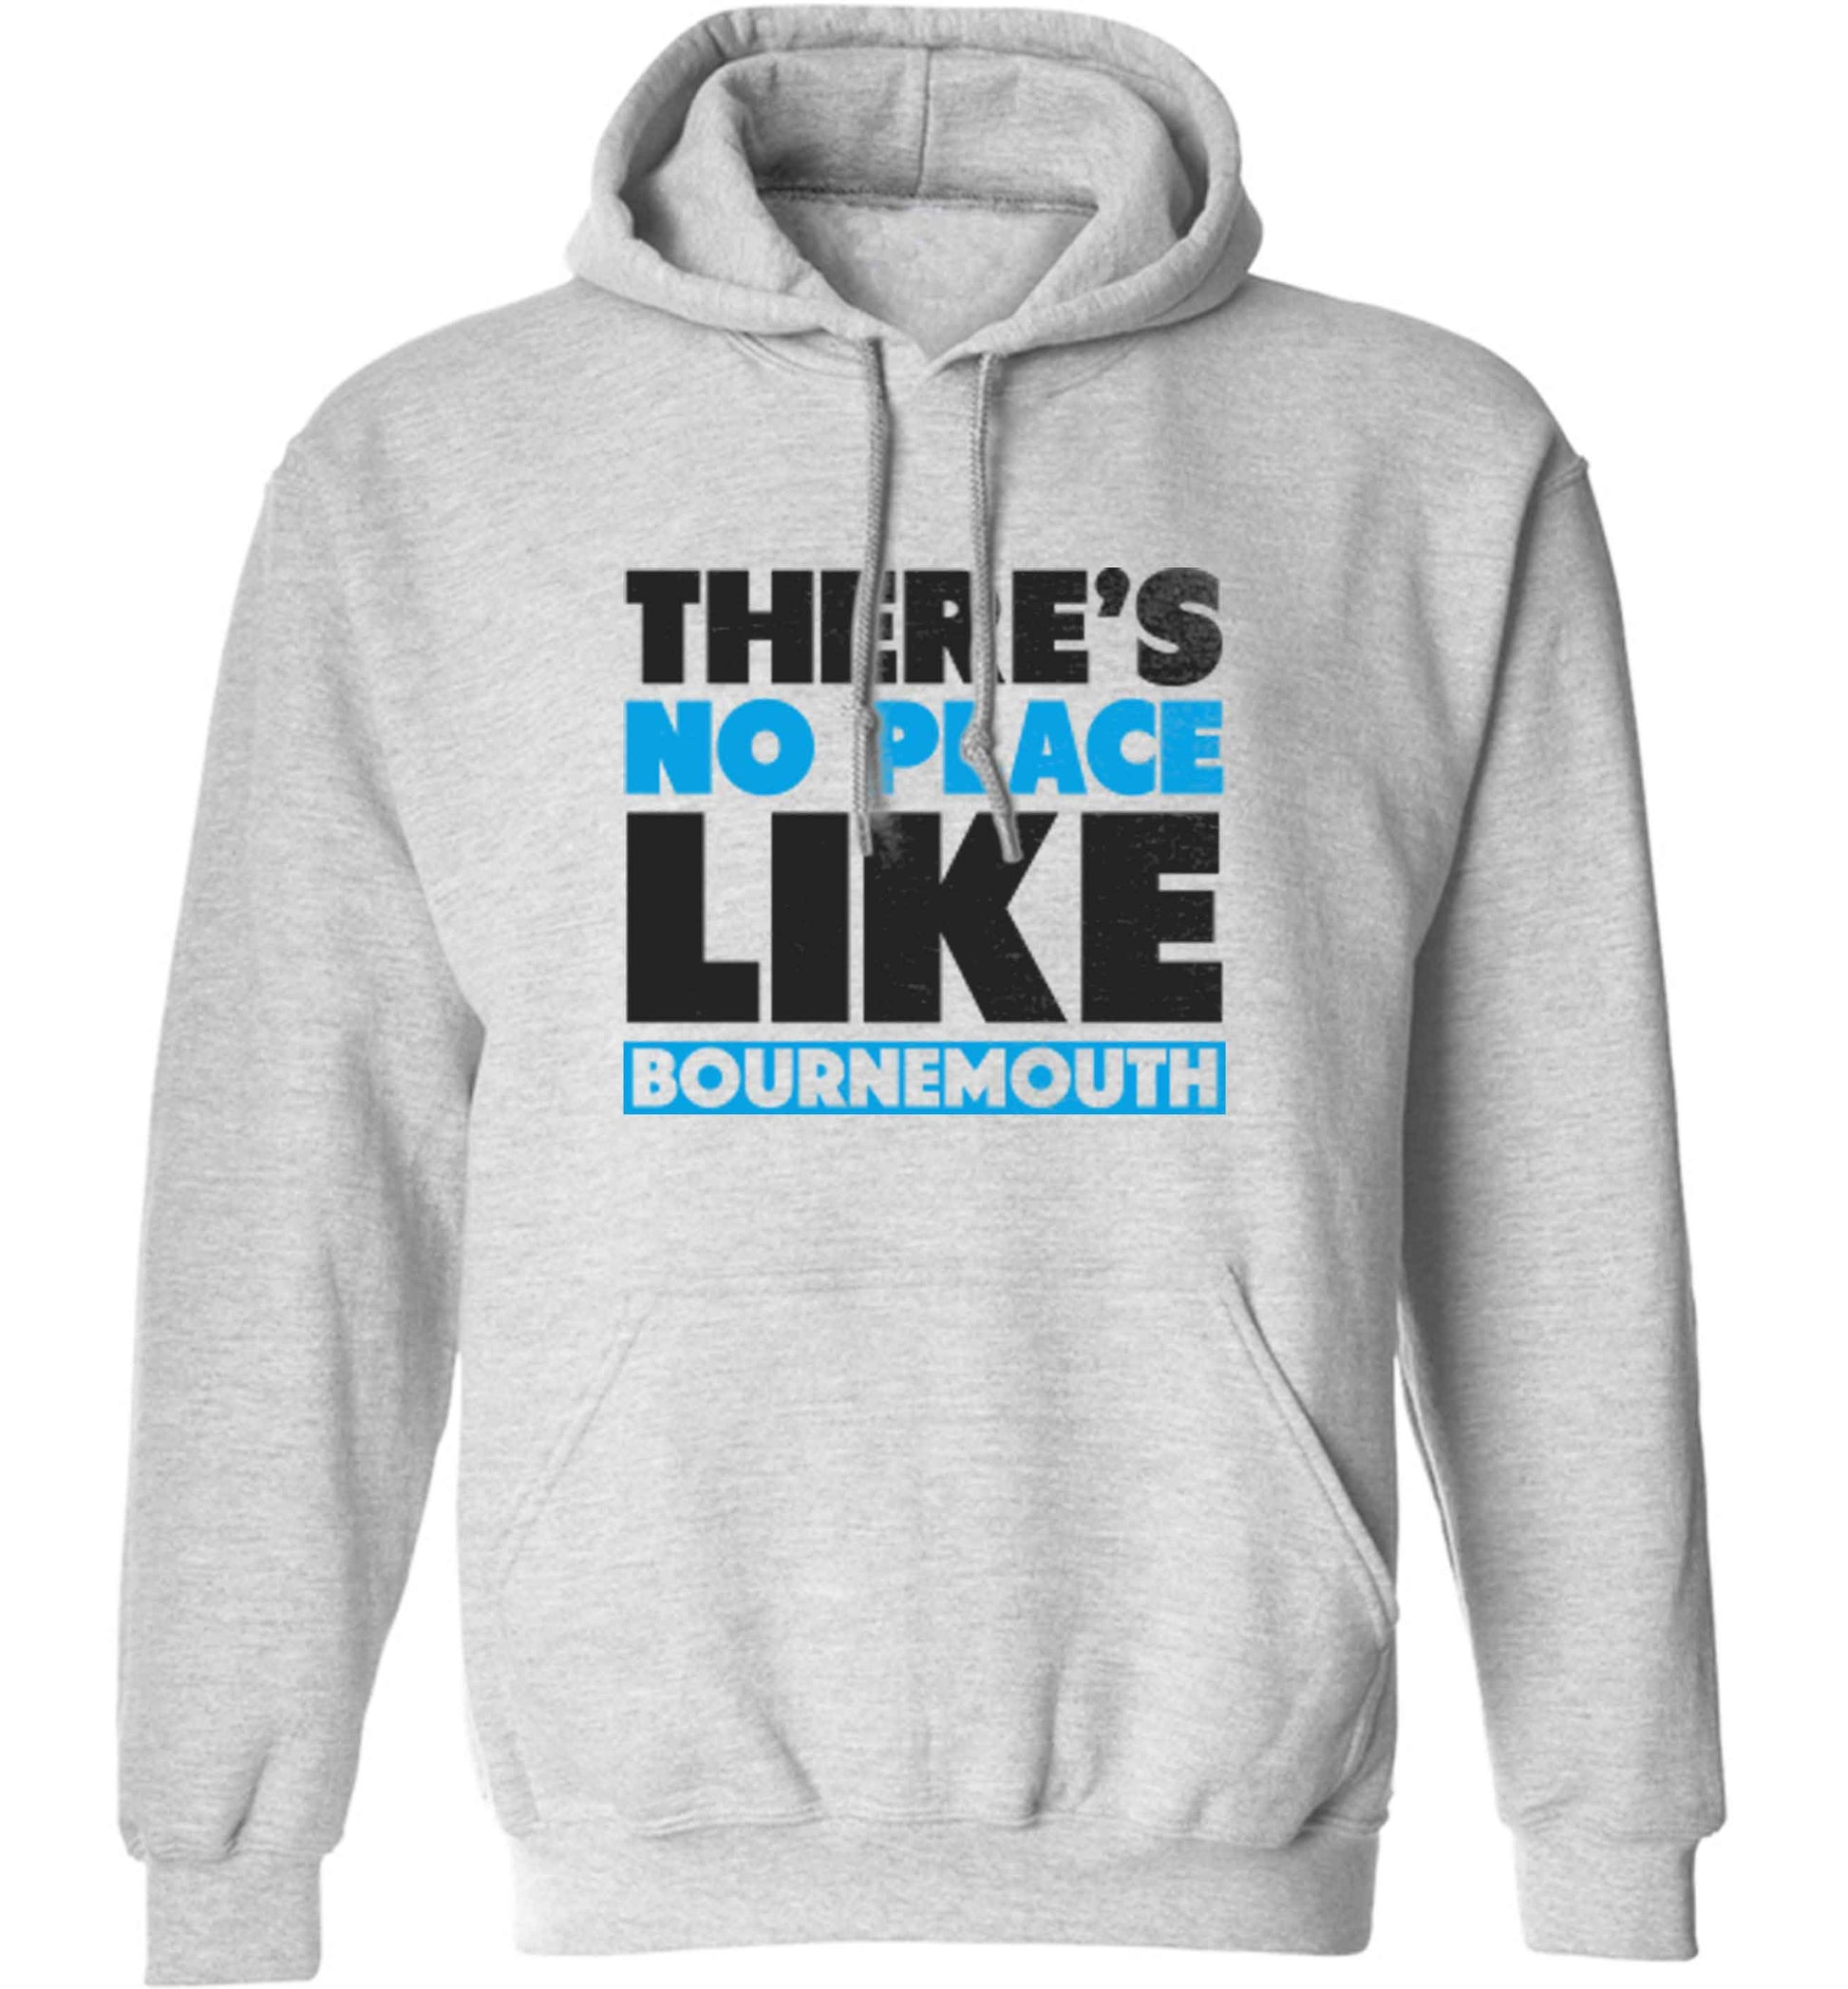 There's no place like Bournemouth adults unisex grey hoodie 2XL